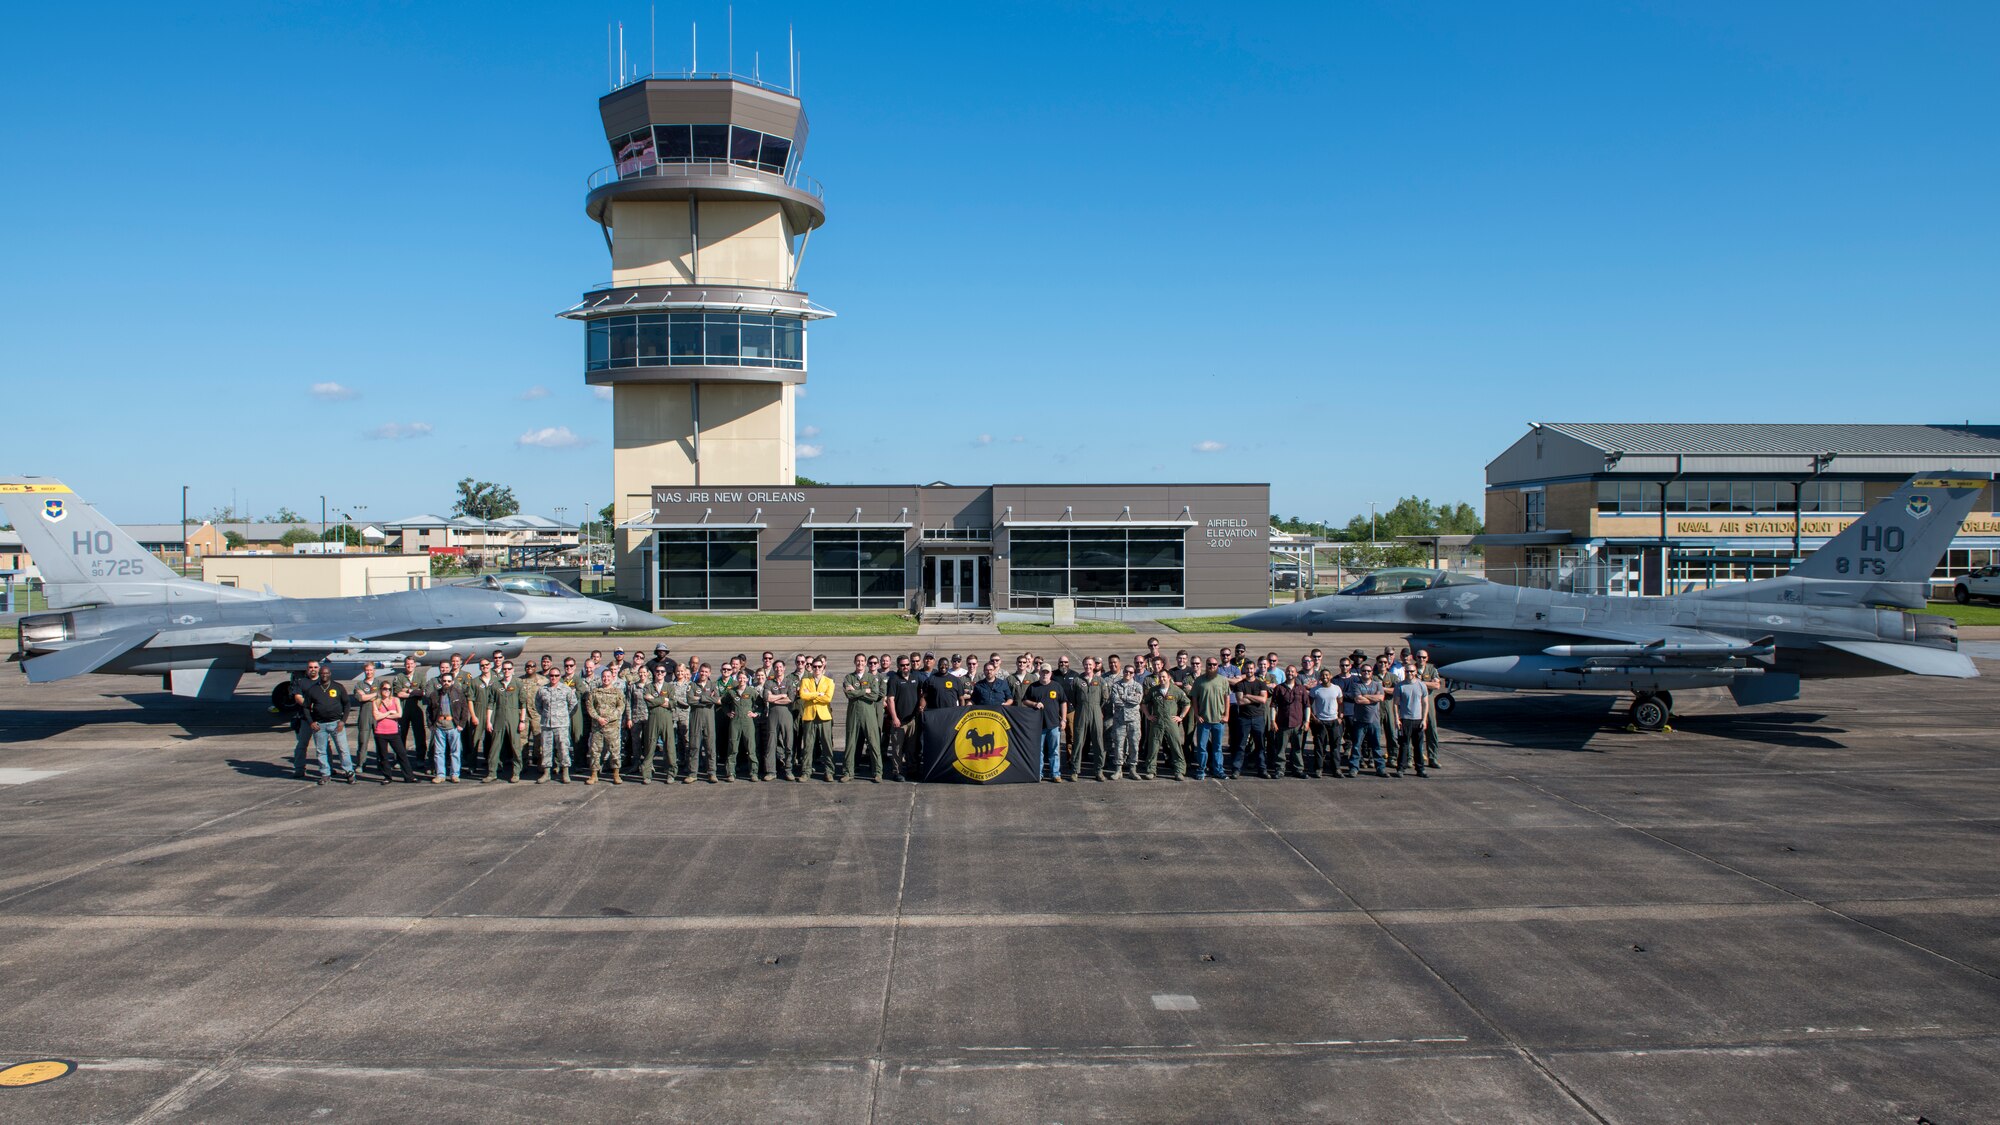 The 8th Fighter Squadron poses for a group photo, April 10, 2019, on Naval Air Station Joint Reserve Base New Orleans, La. No longer was the 8th FS in the high altitudes of the dry, brown desert of Holloman Air Force Base, N.M., but was now below sea level in the humid, deep south of Louisiana to conduct dissimilar aircraft training and close air support. (U.S. Air Force photo by Airman 1st Class Kindra Stewart)